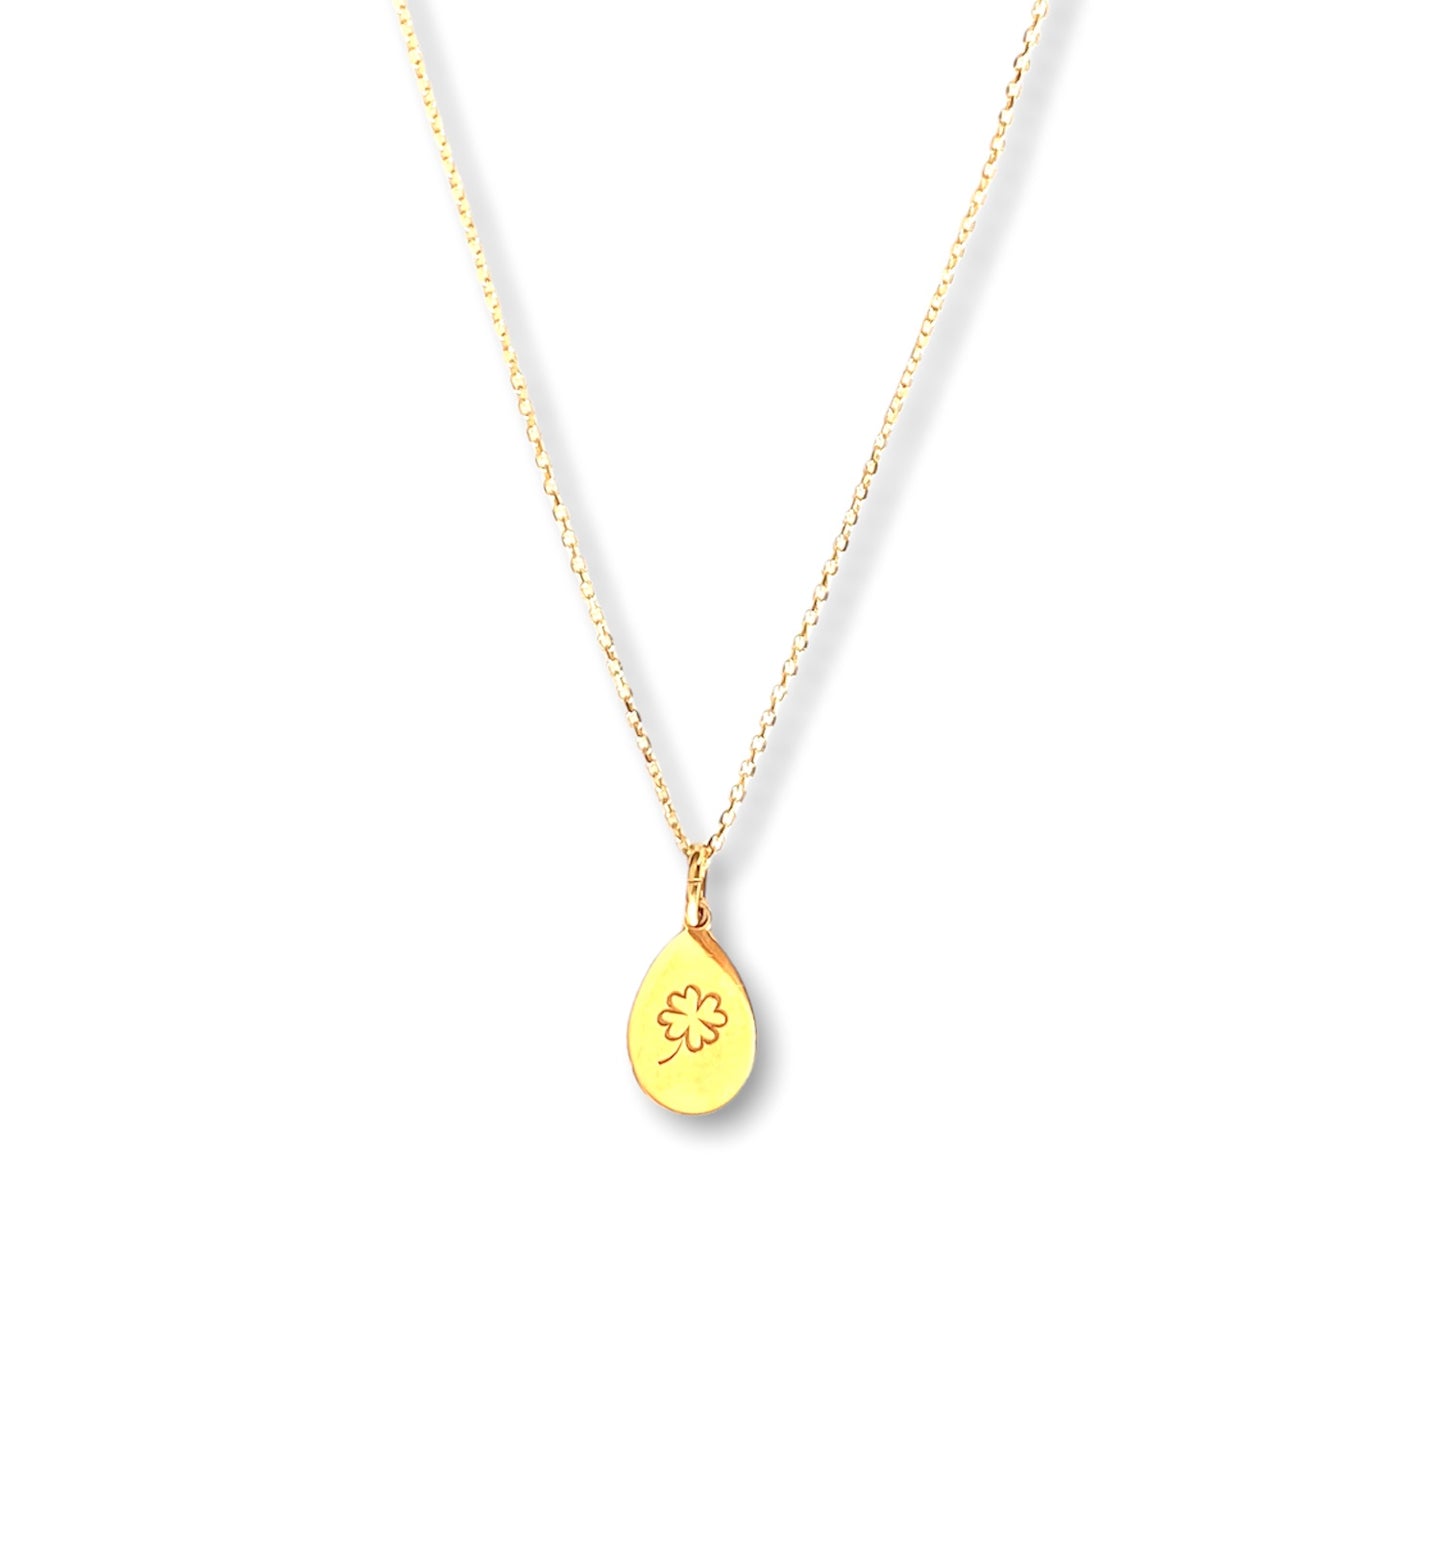 Eggs | Tiny drop pendant goldplated silver